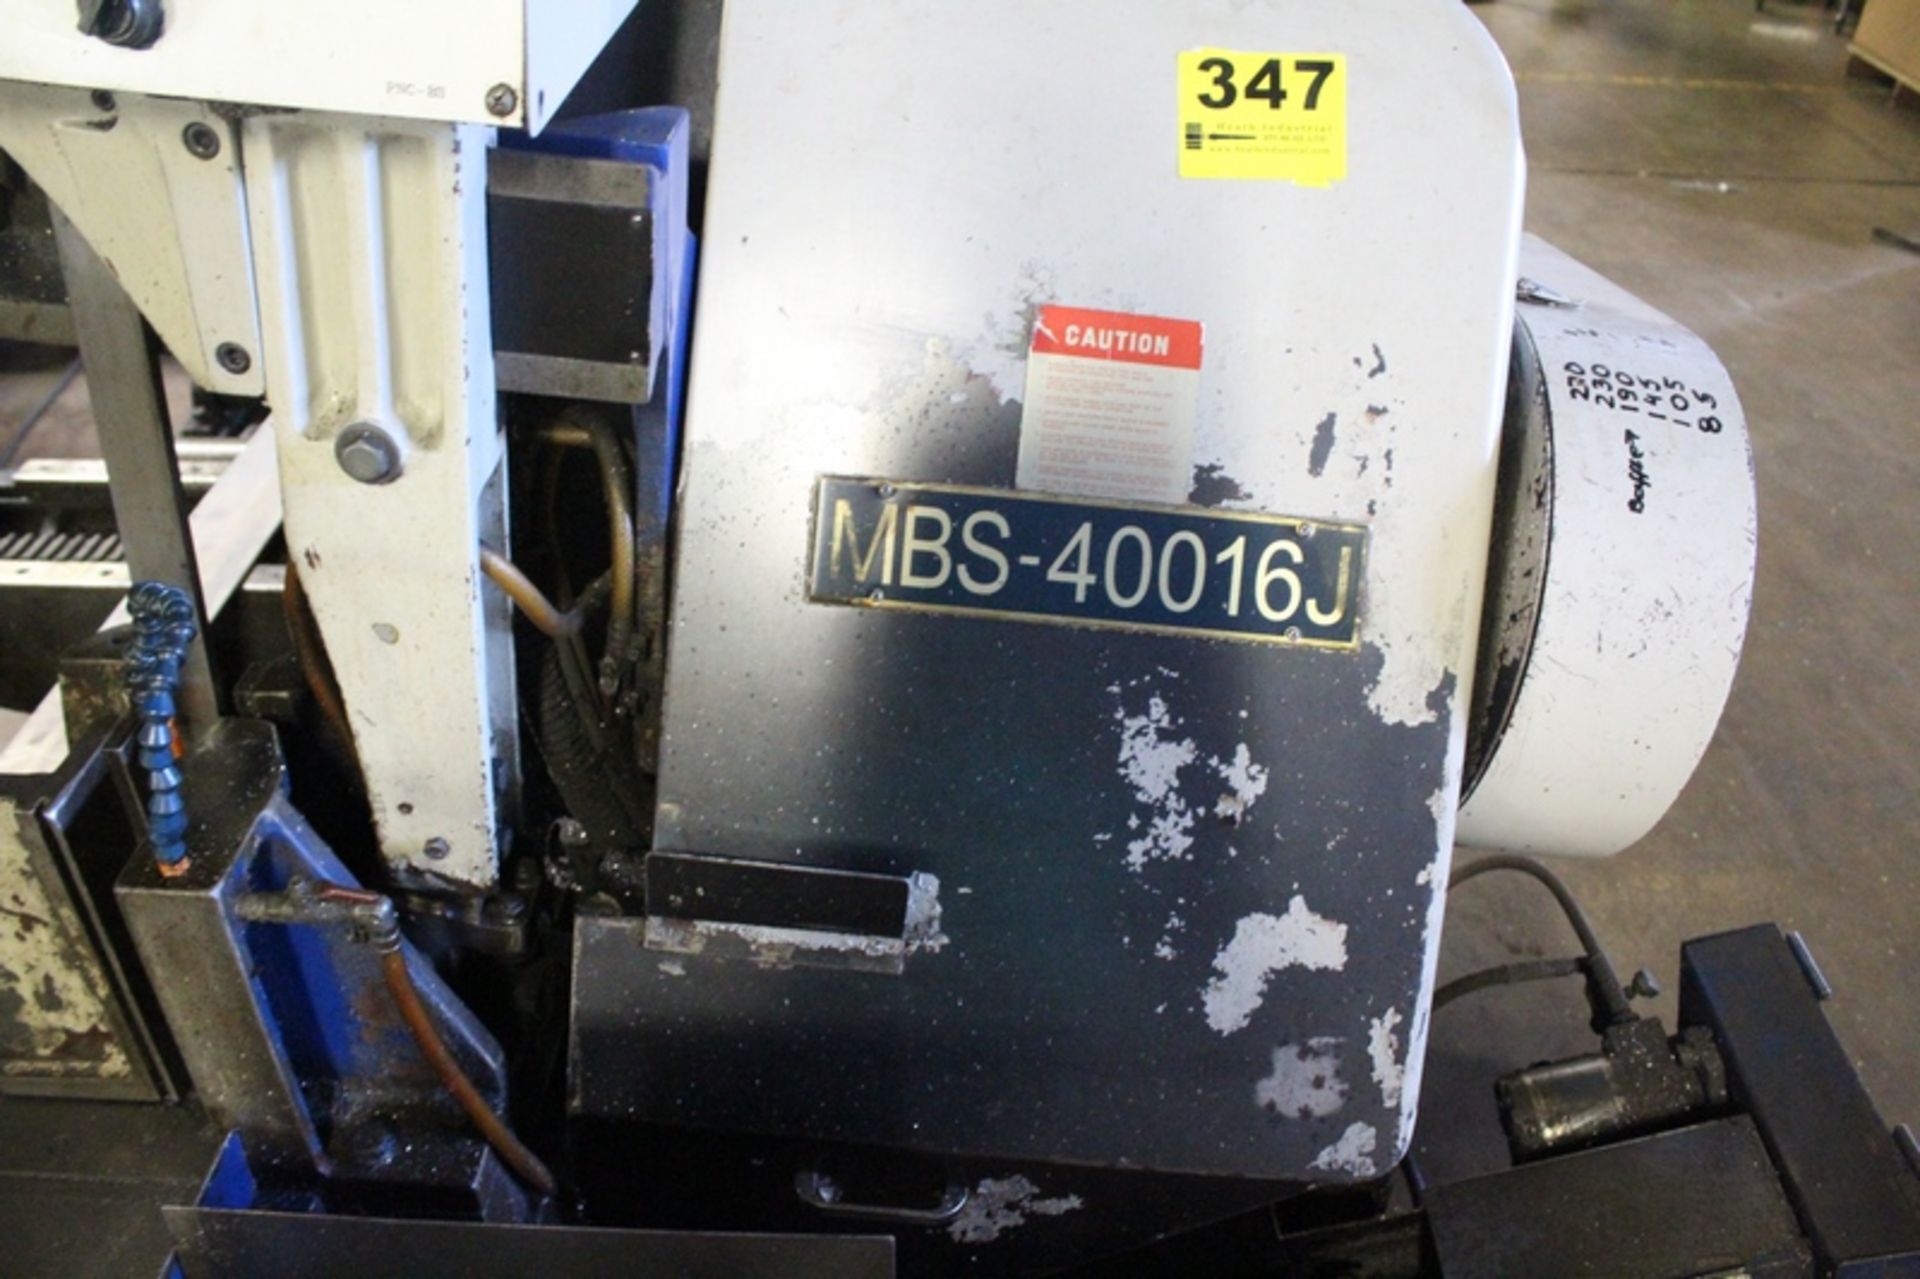 JET MODEL MBS-40016J AUTOMATIC HORIZONTAL BAND SAW, S/N 980716 (NEW 1998), WITH AUTOMATIC STOCK - Image 6 of 8